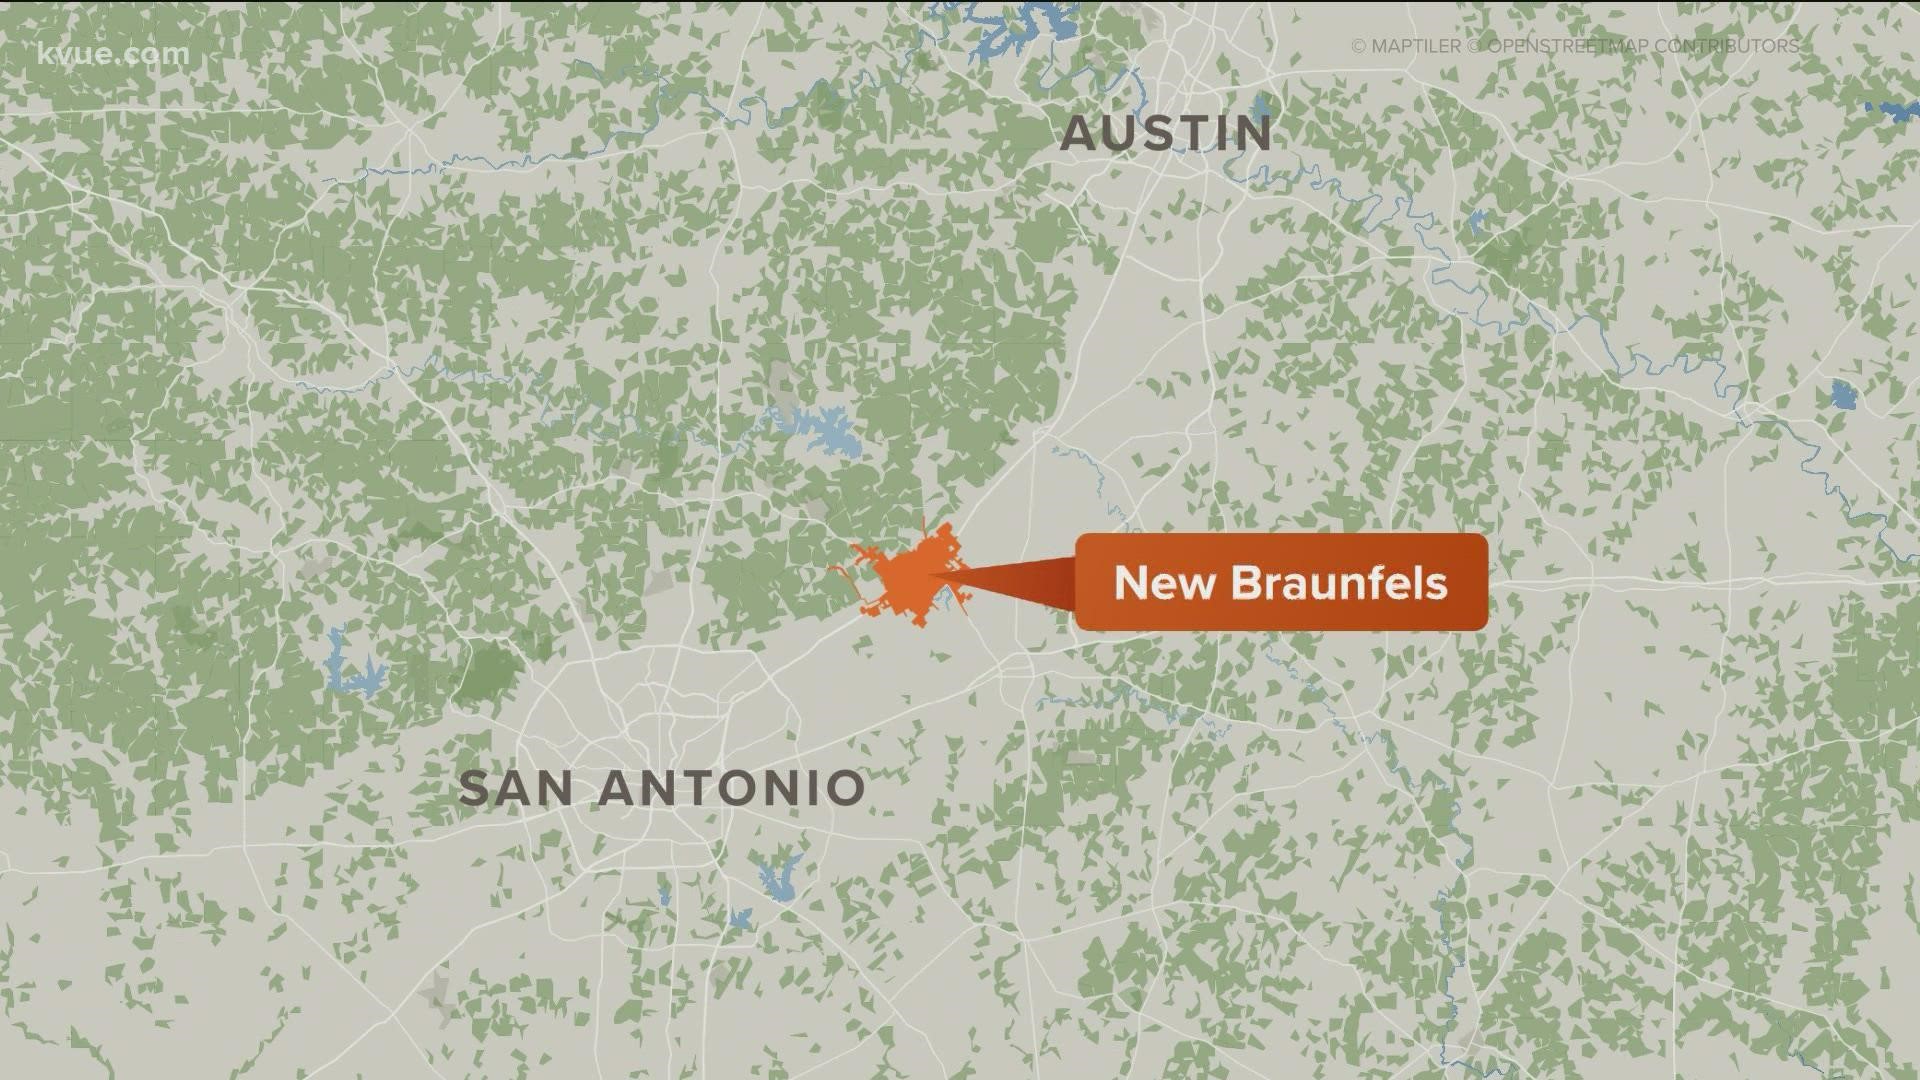 U.S. Census officials say New Braunfels grew by 56% over the last 10 years.